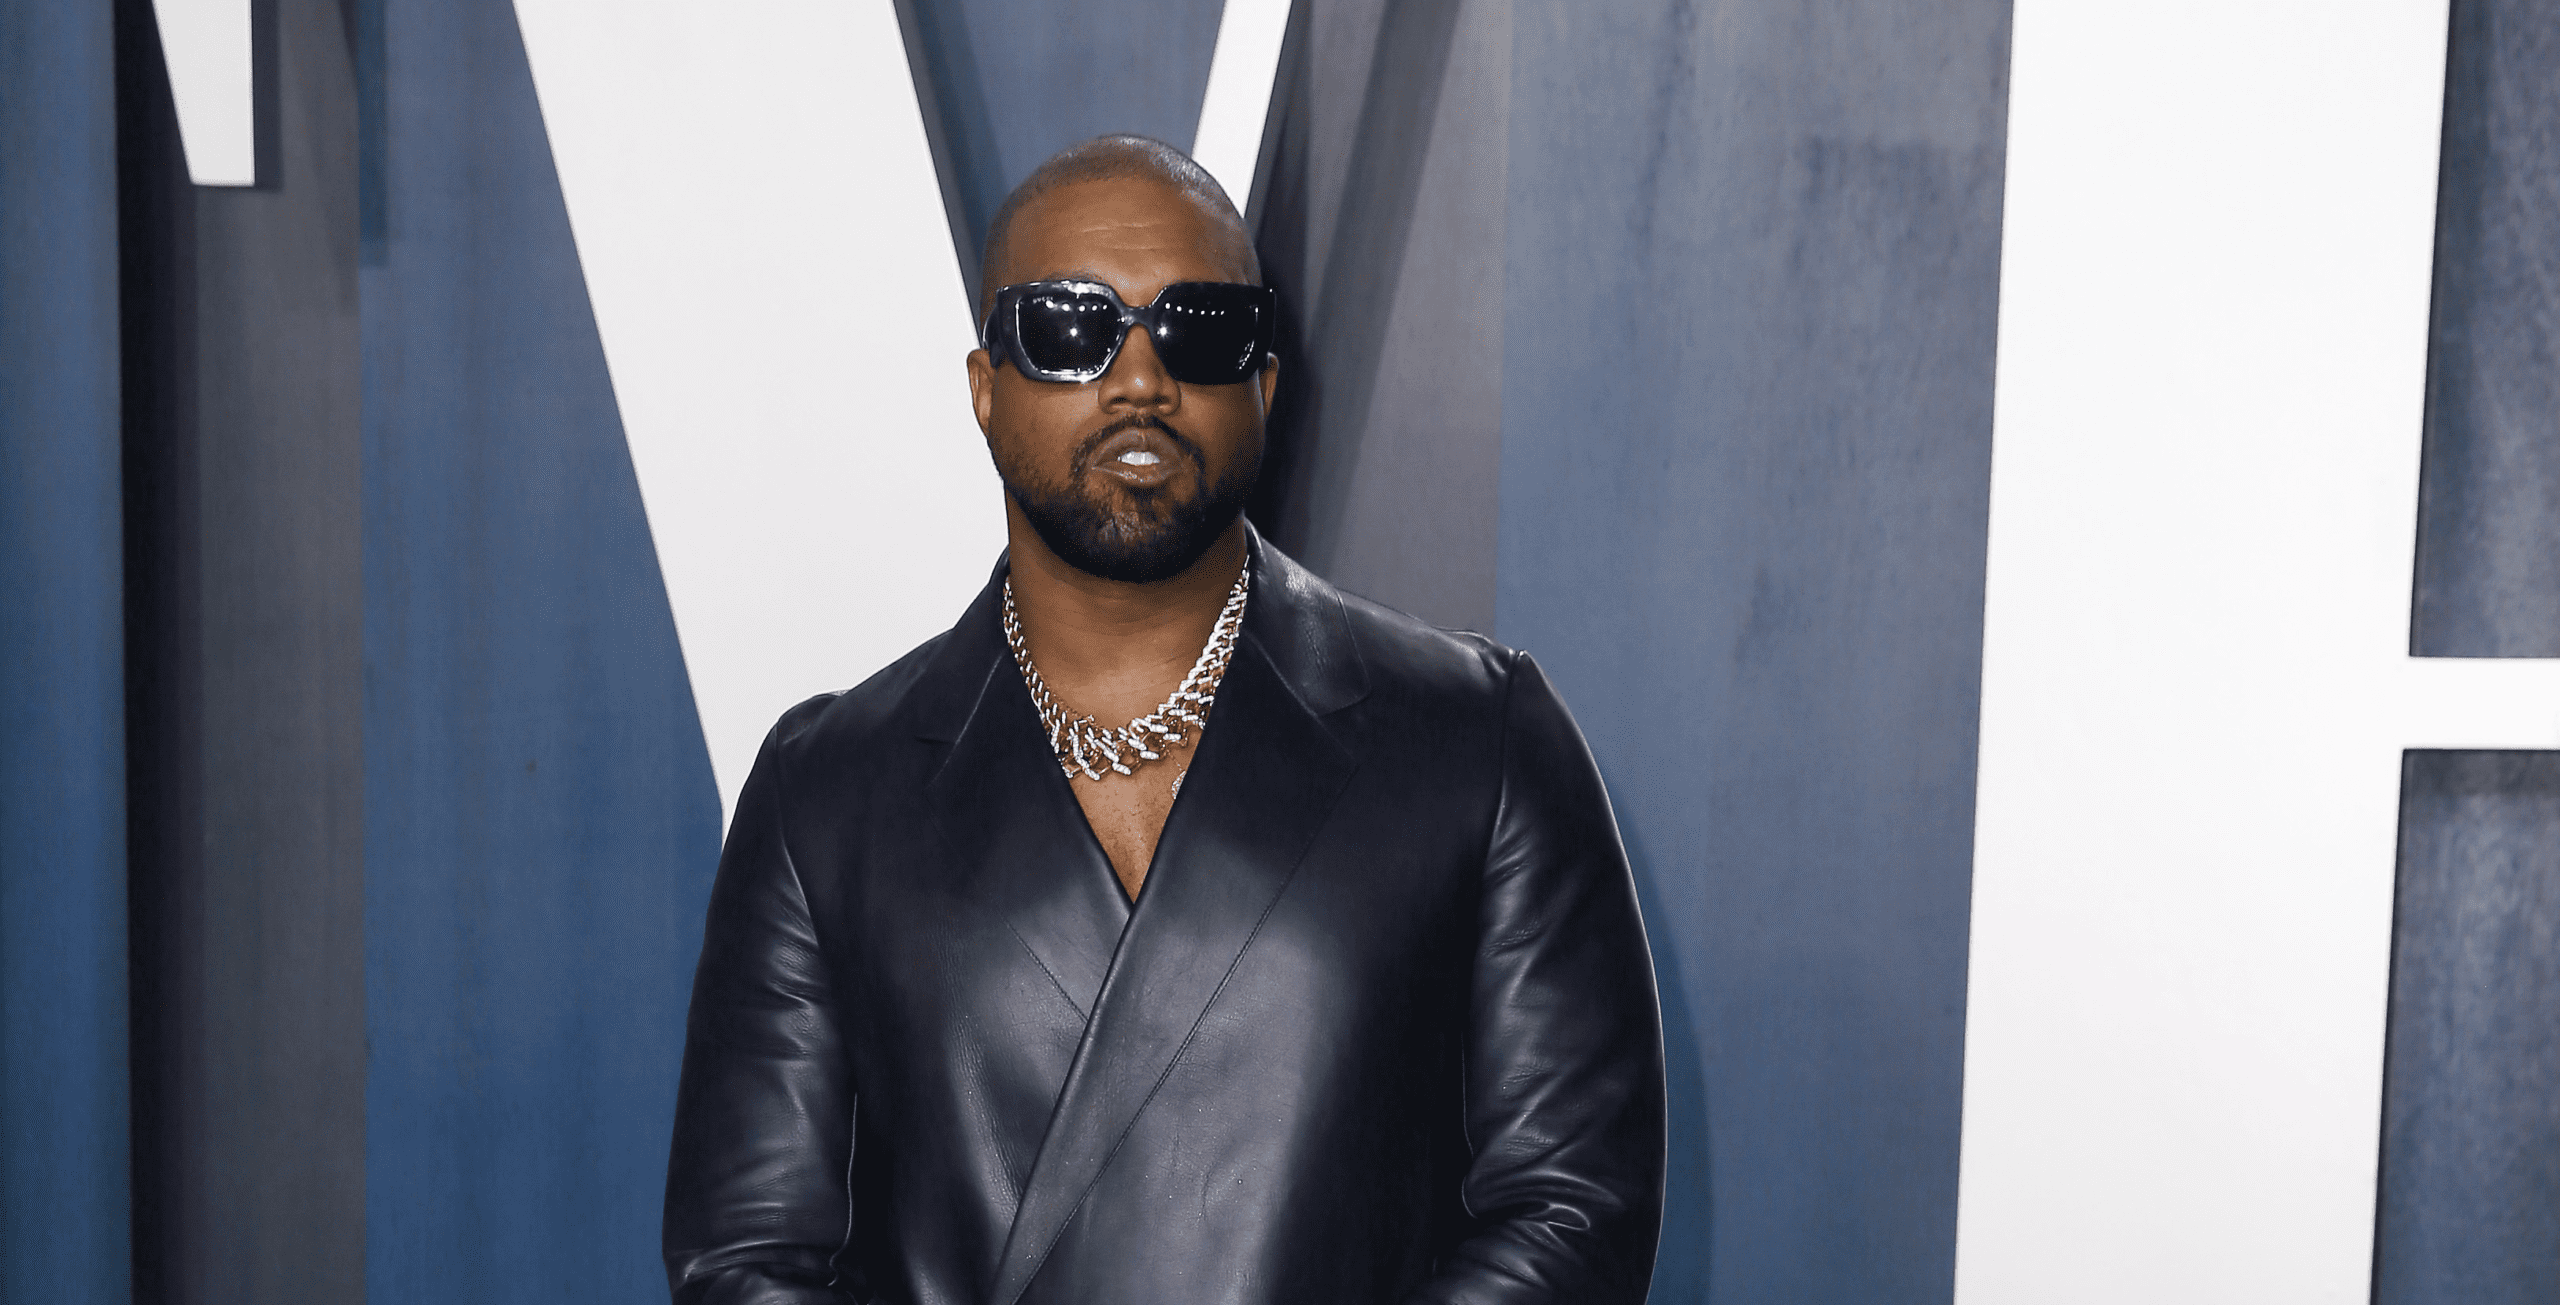 Kanye West’s high school art valued at thousands of dollars on Antiques Roadshow